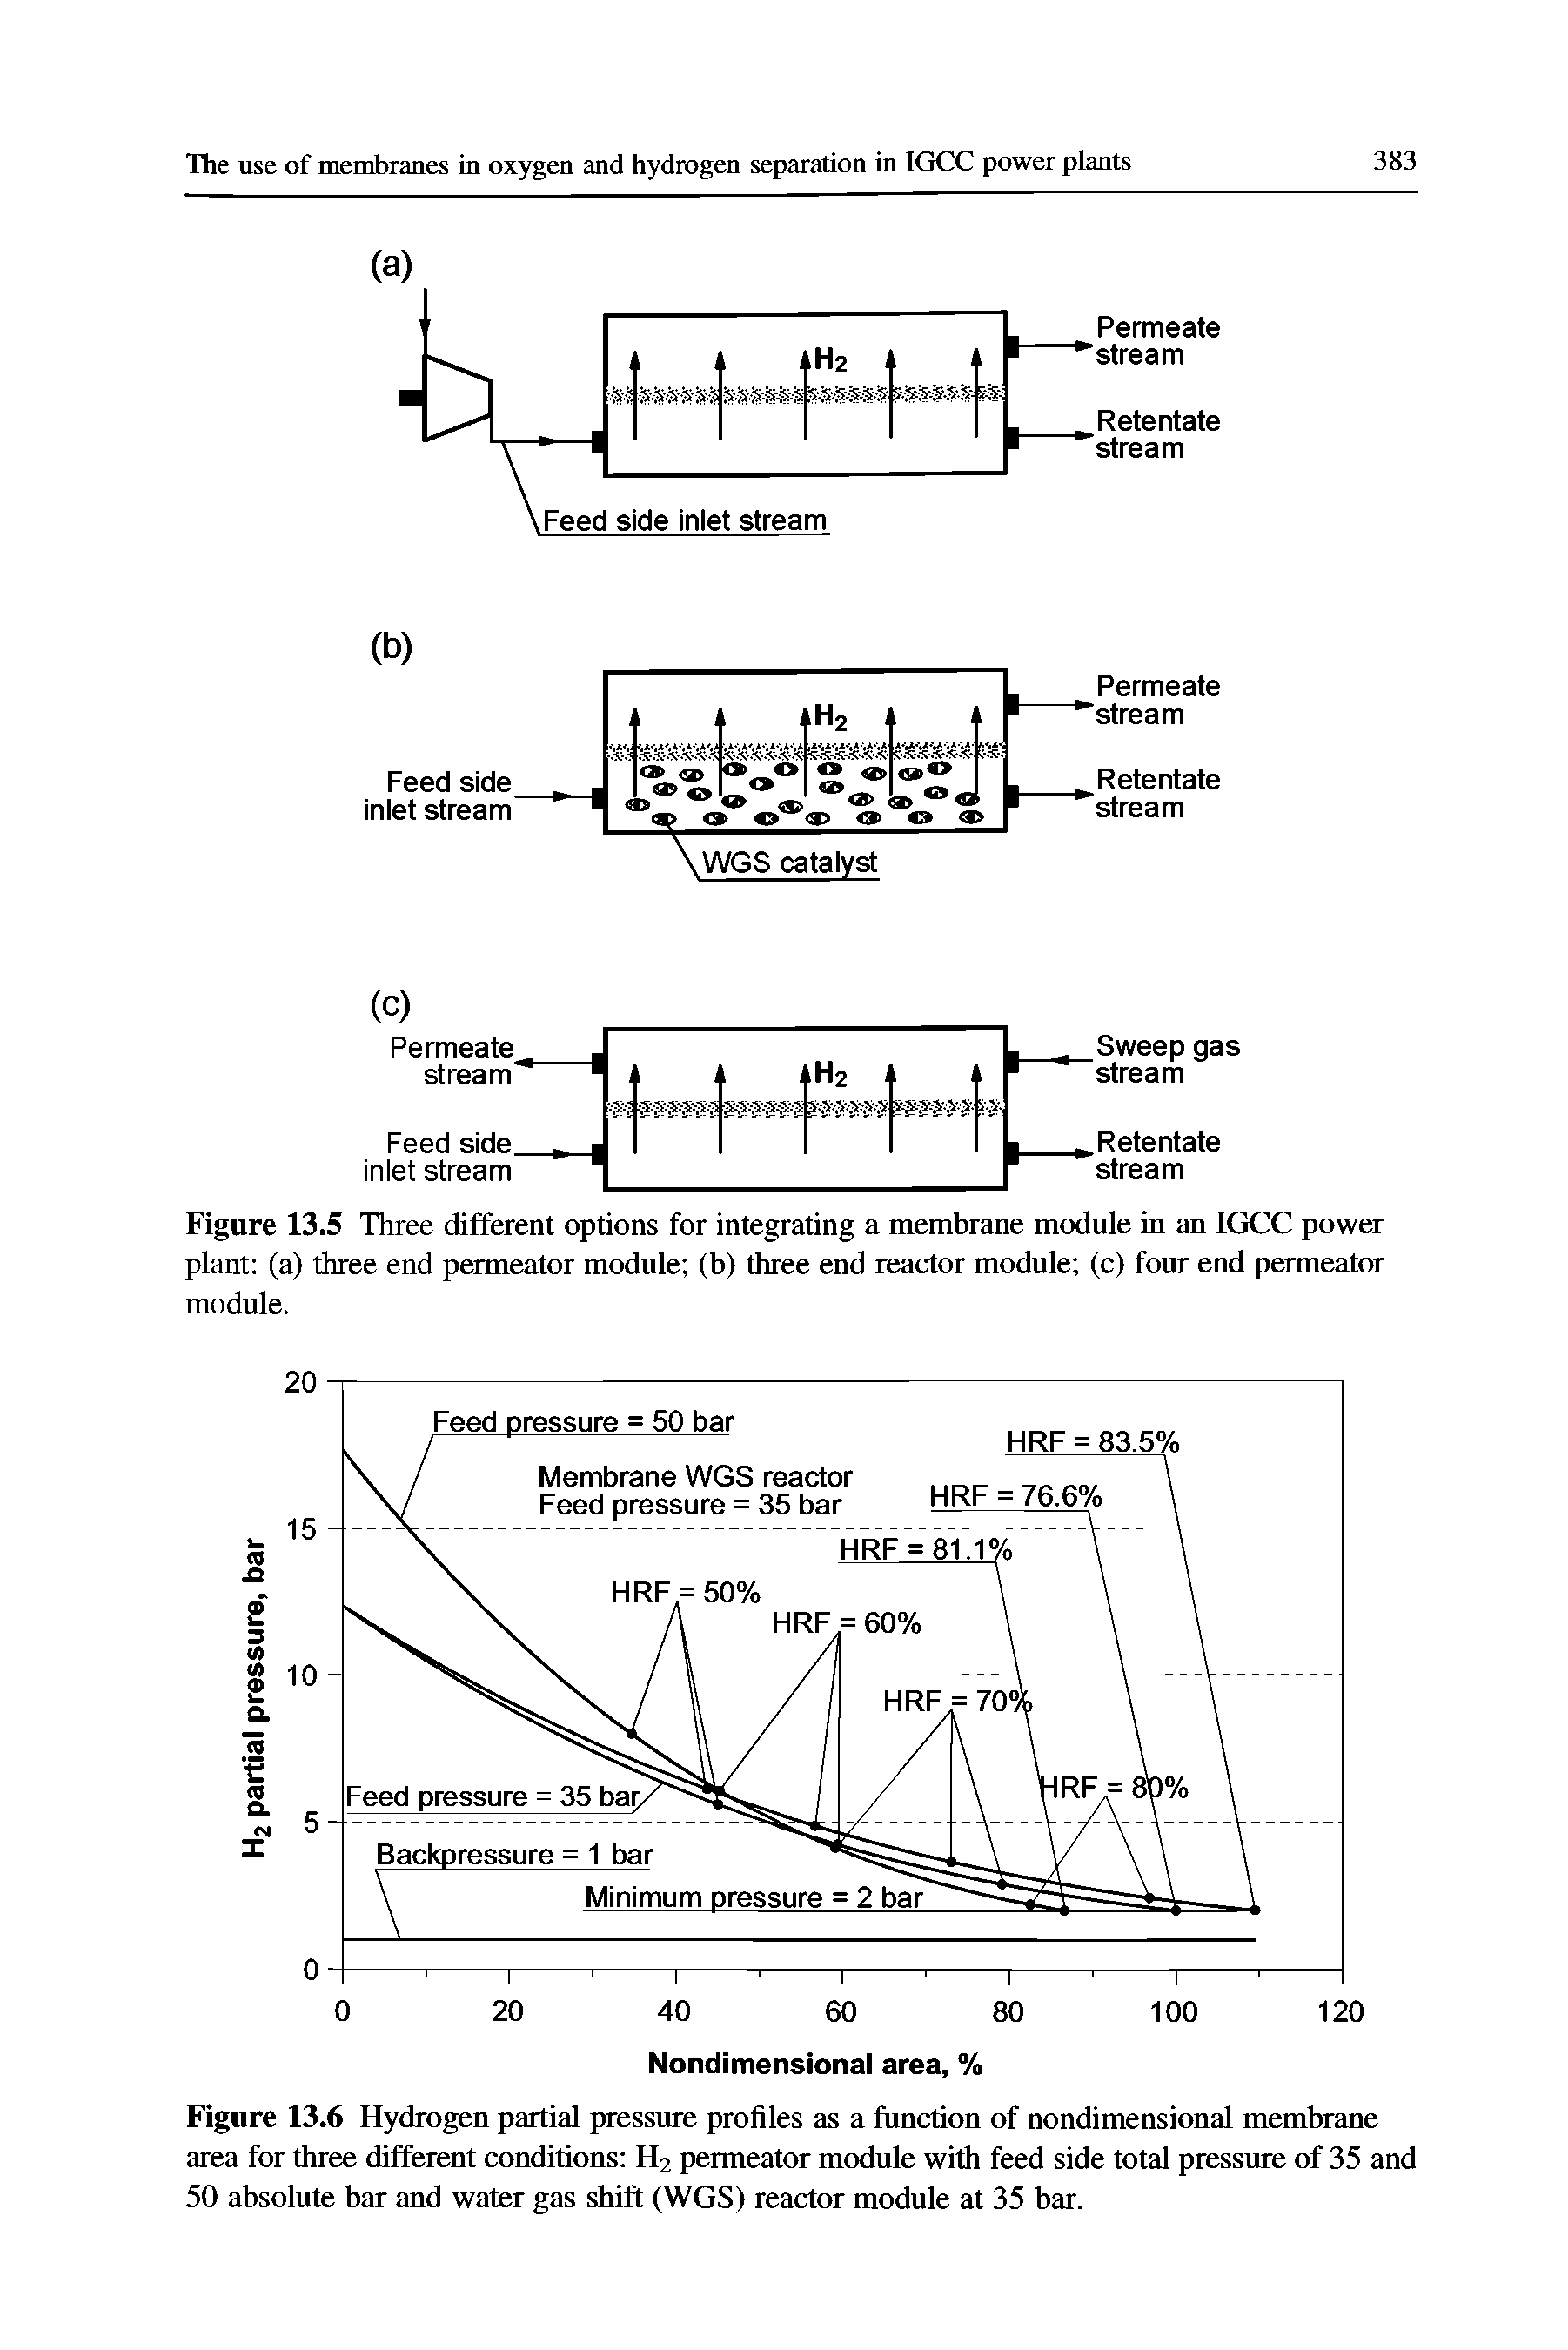 Figure 13.6 Hydrogen partial pressure profiles as a function of nondimensional membrane area for three different conditions H2 permeator module with feed side total pressure of 35 and 50 absolute bar and water gas shift (WGS) reactor module at 35 bar.